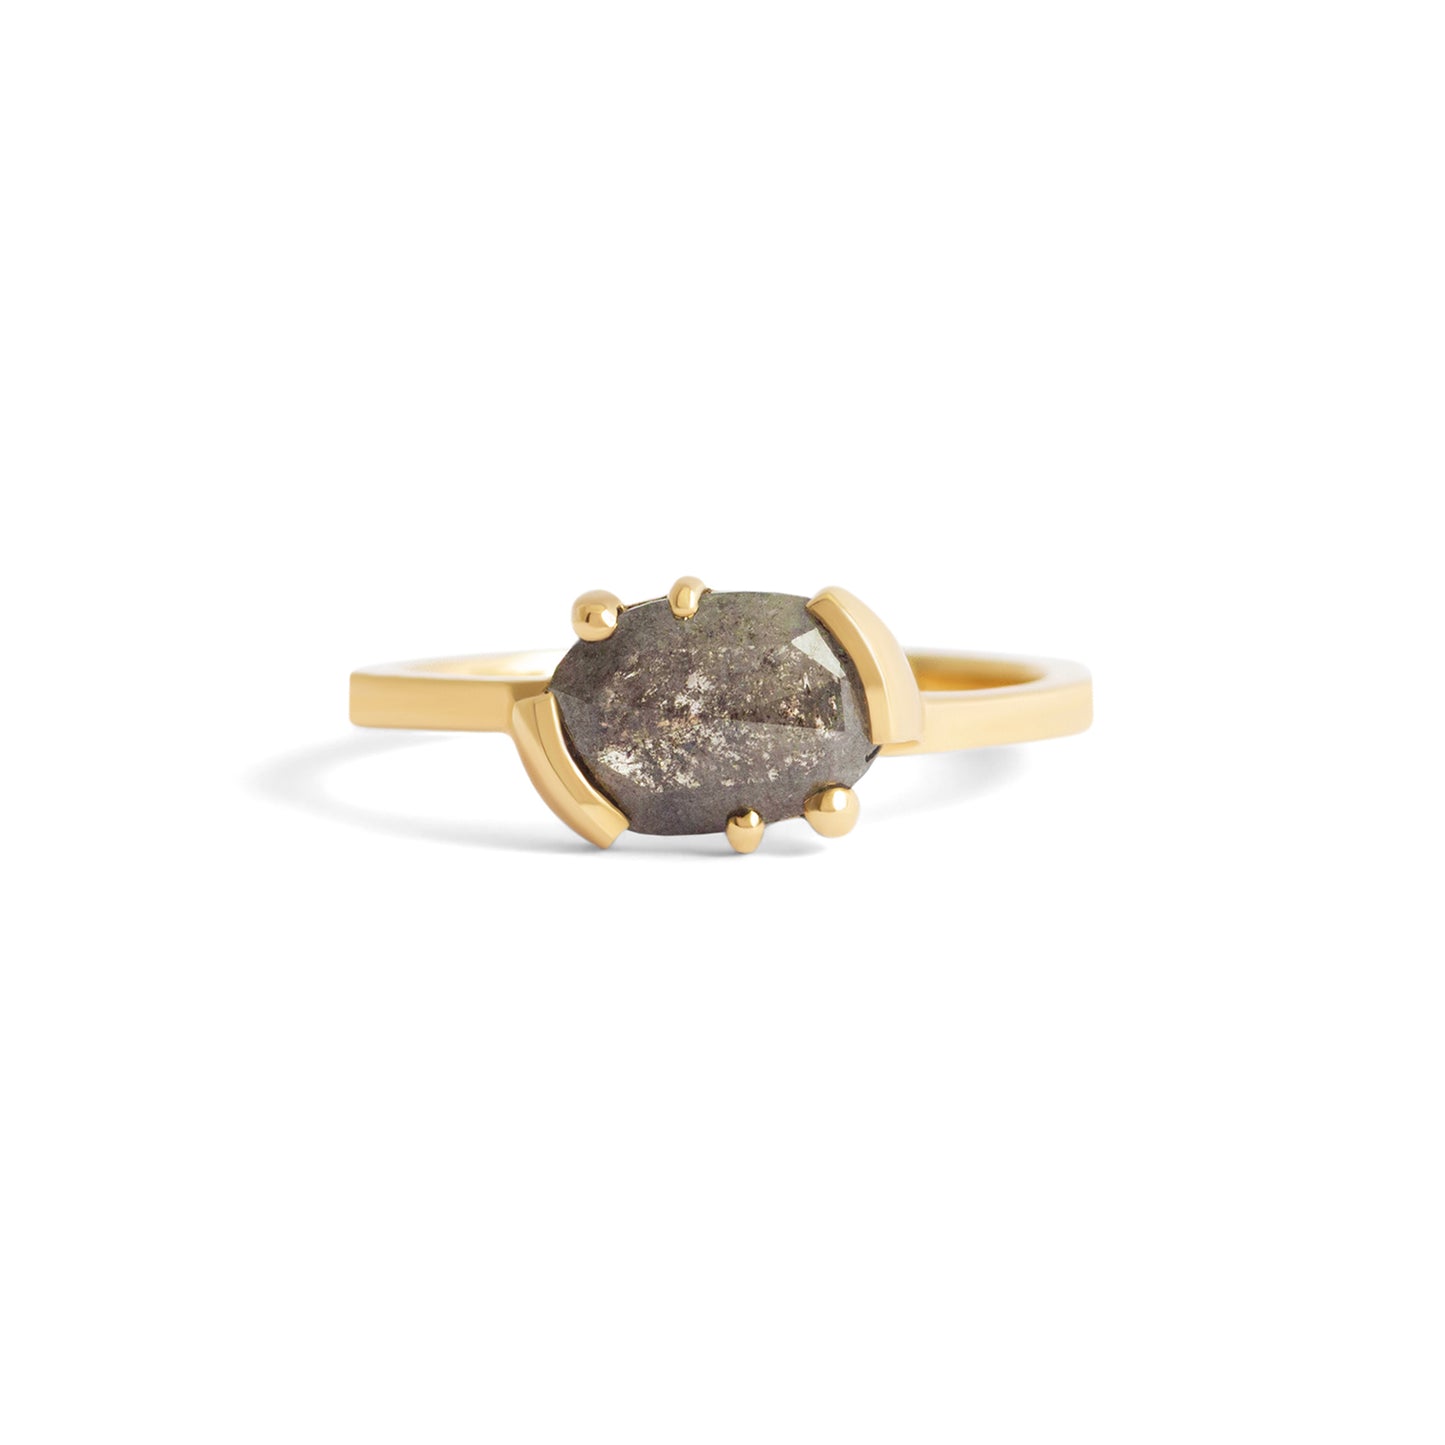 Load image into Gallery viewer, Miro Ring / Rose Cut Oval S + P Diamond 1.02ct - Goldpoint Studio - Greenpoint, Brooklyn - Fine Jewelry
